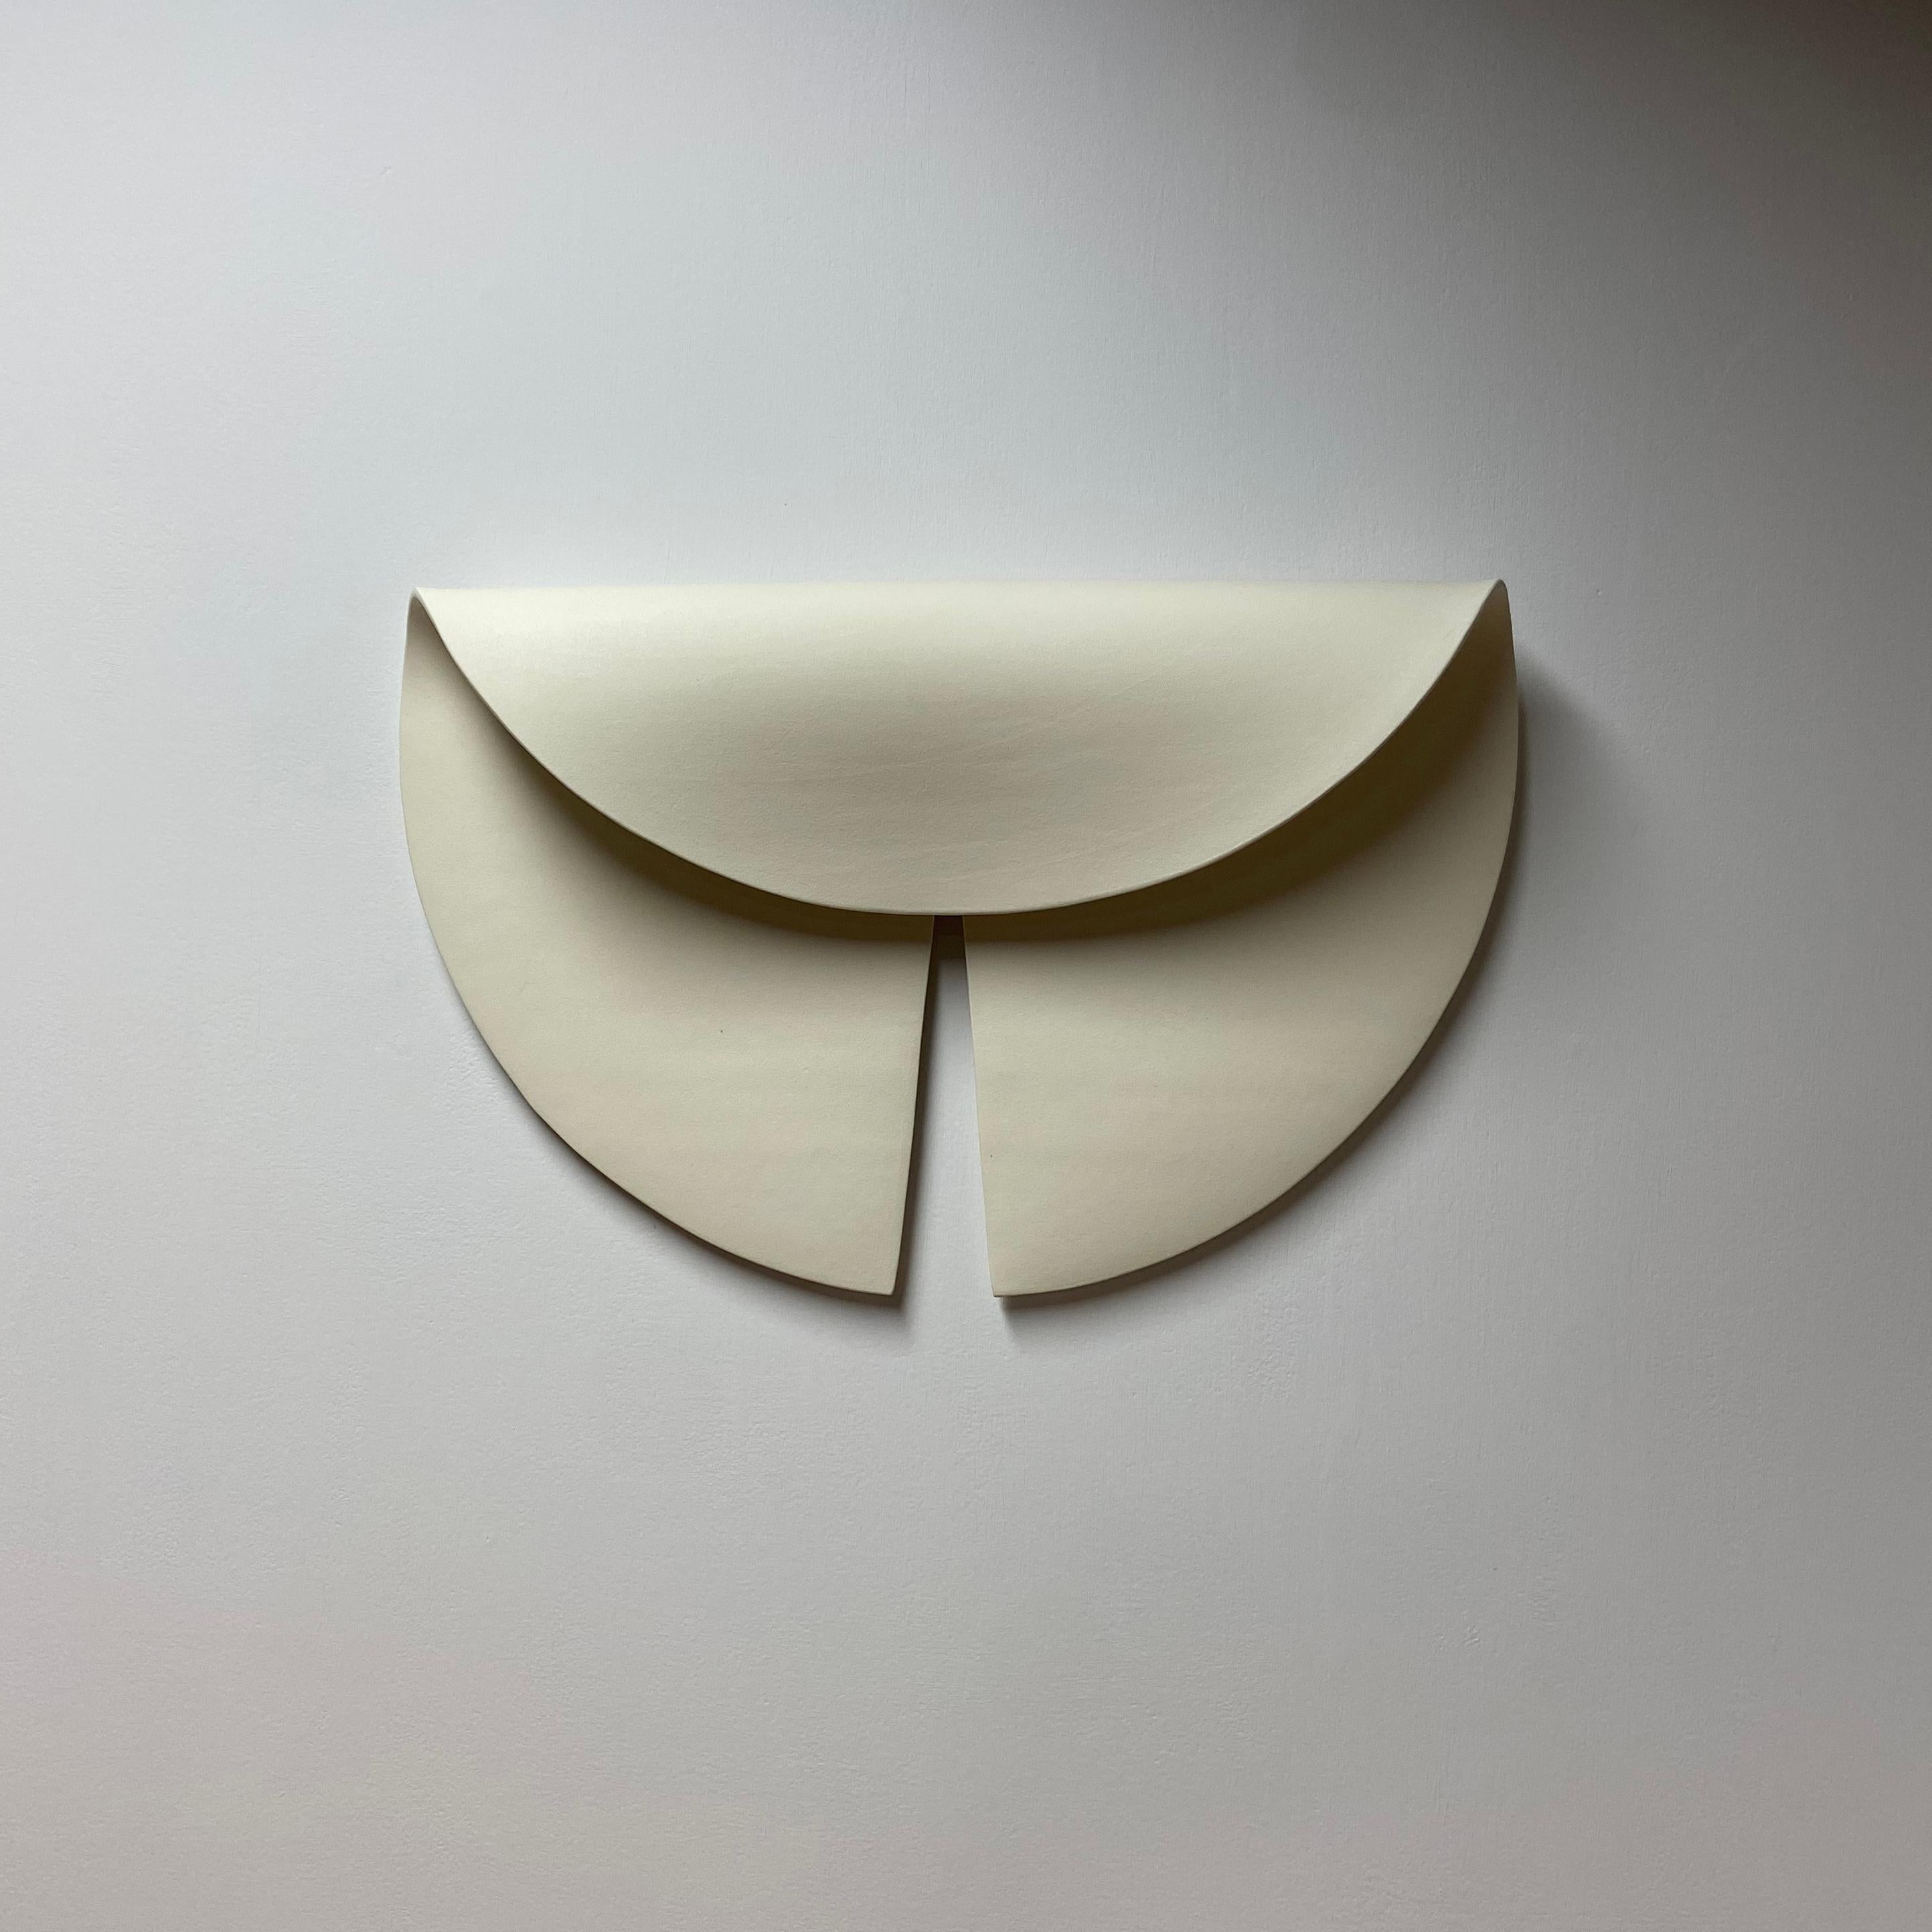 North American Ceramic Wall Sculpture: 'Leaf' PAIR OF TWO / By Olivia Barry For Sale